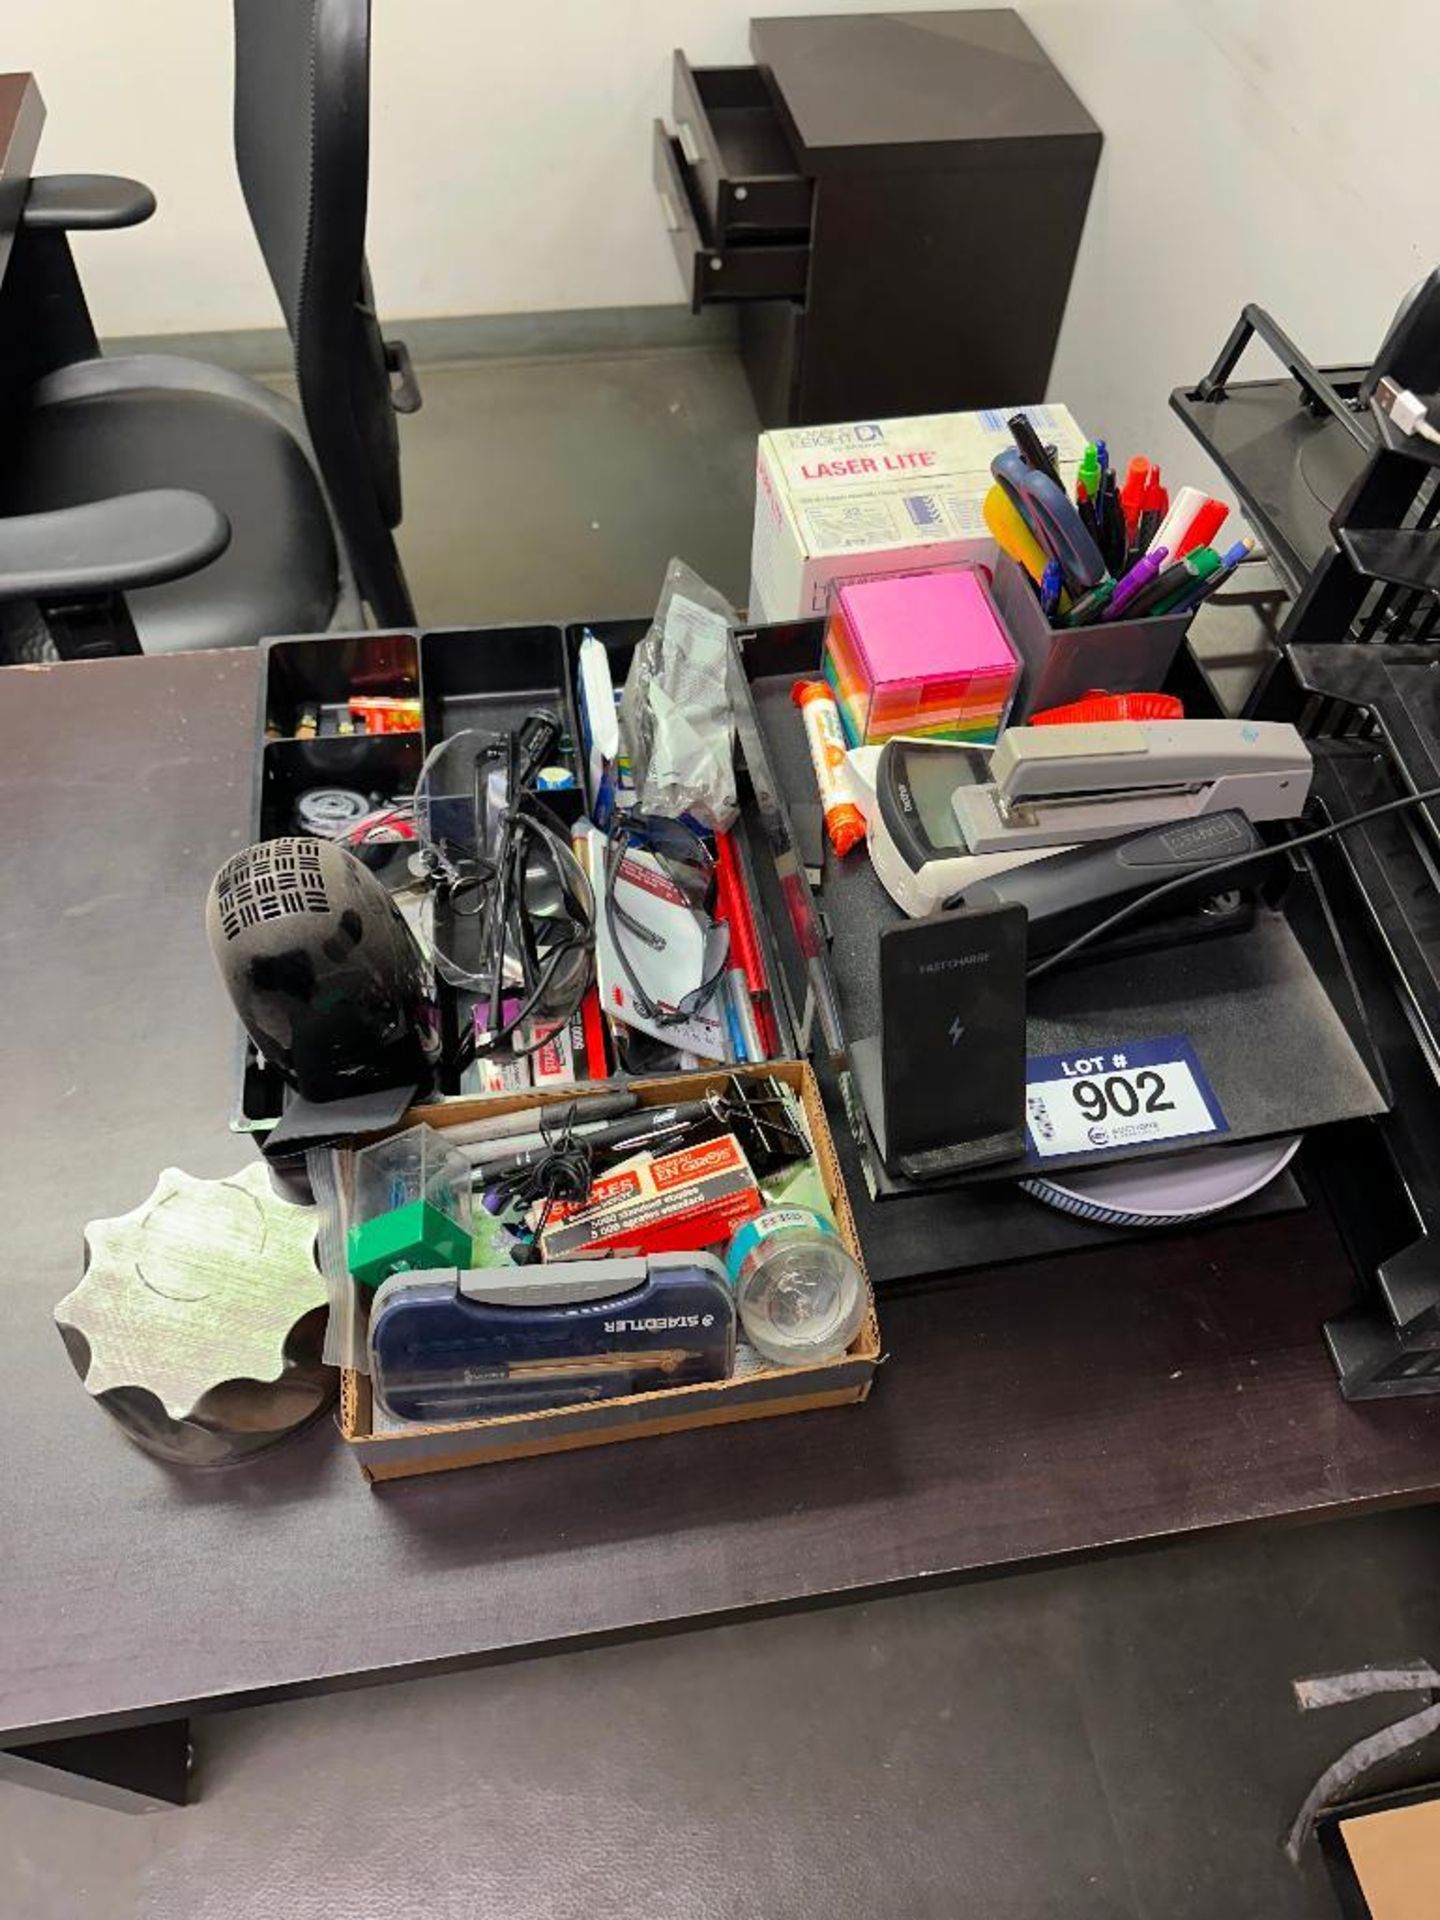 Lot of Asst. Office Supplies including File Organizers, Staplers, Label Maker, etc. - Image 10 of 12